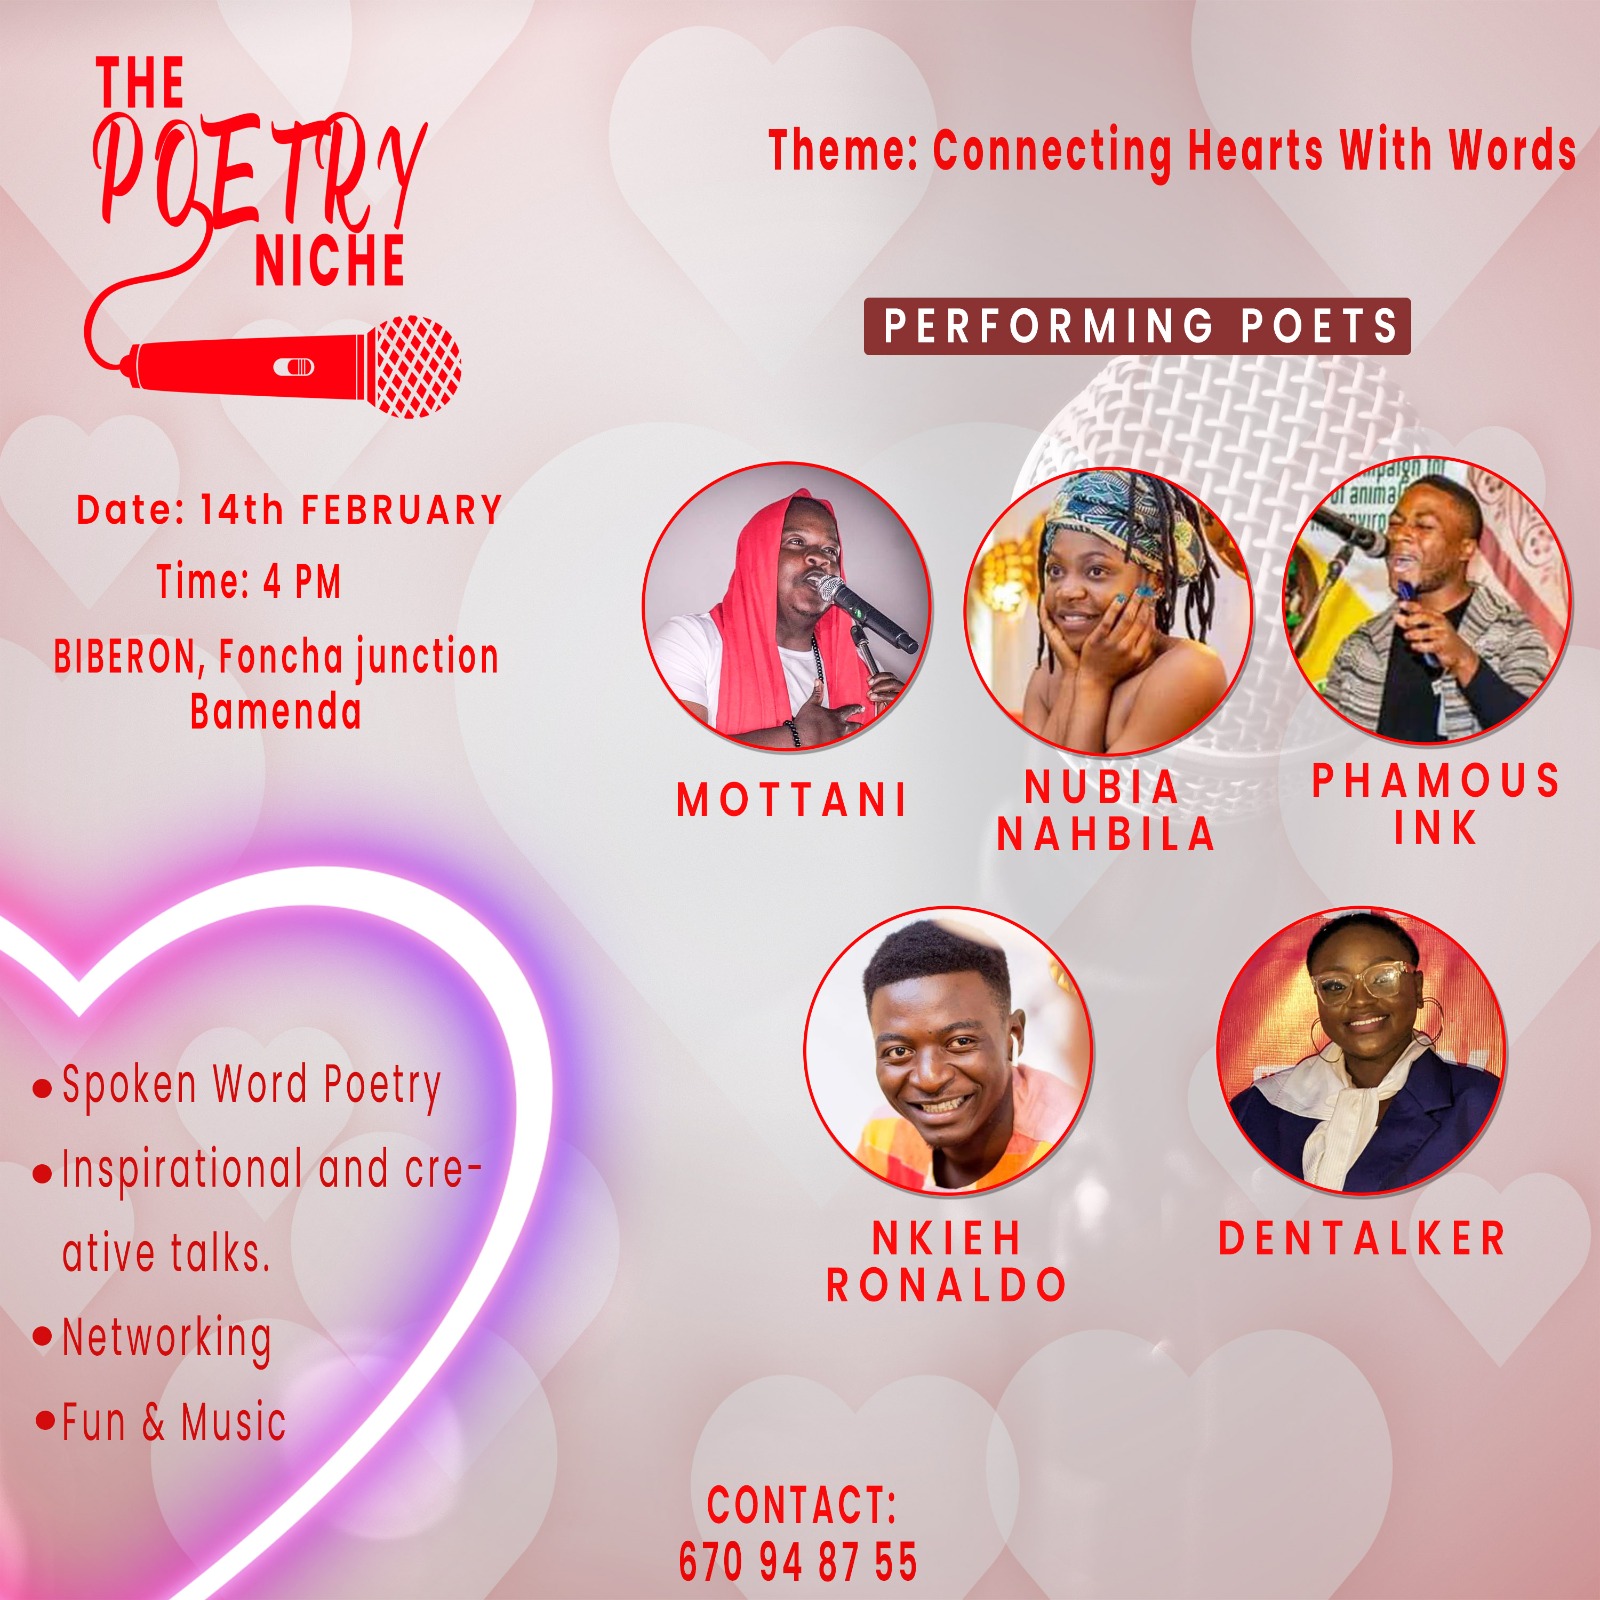 The Poetry Niche's Val's Day 